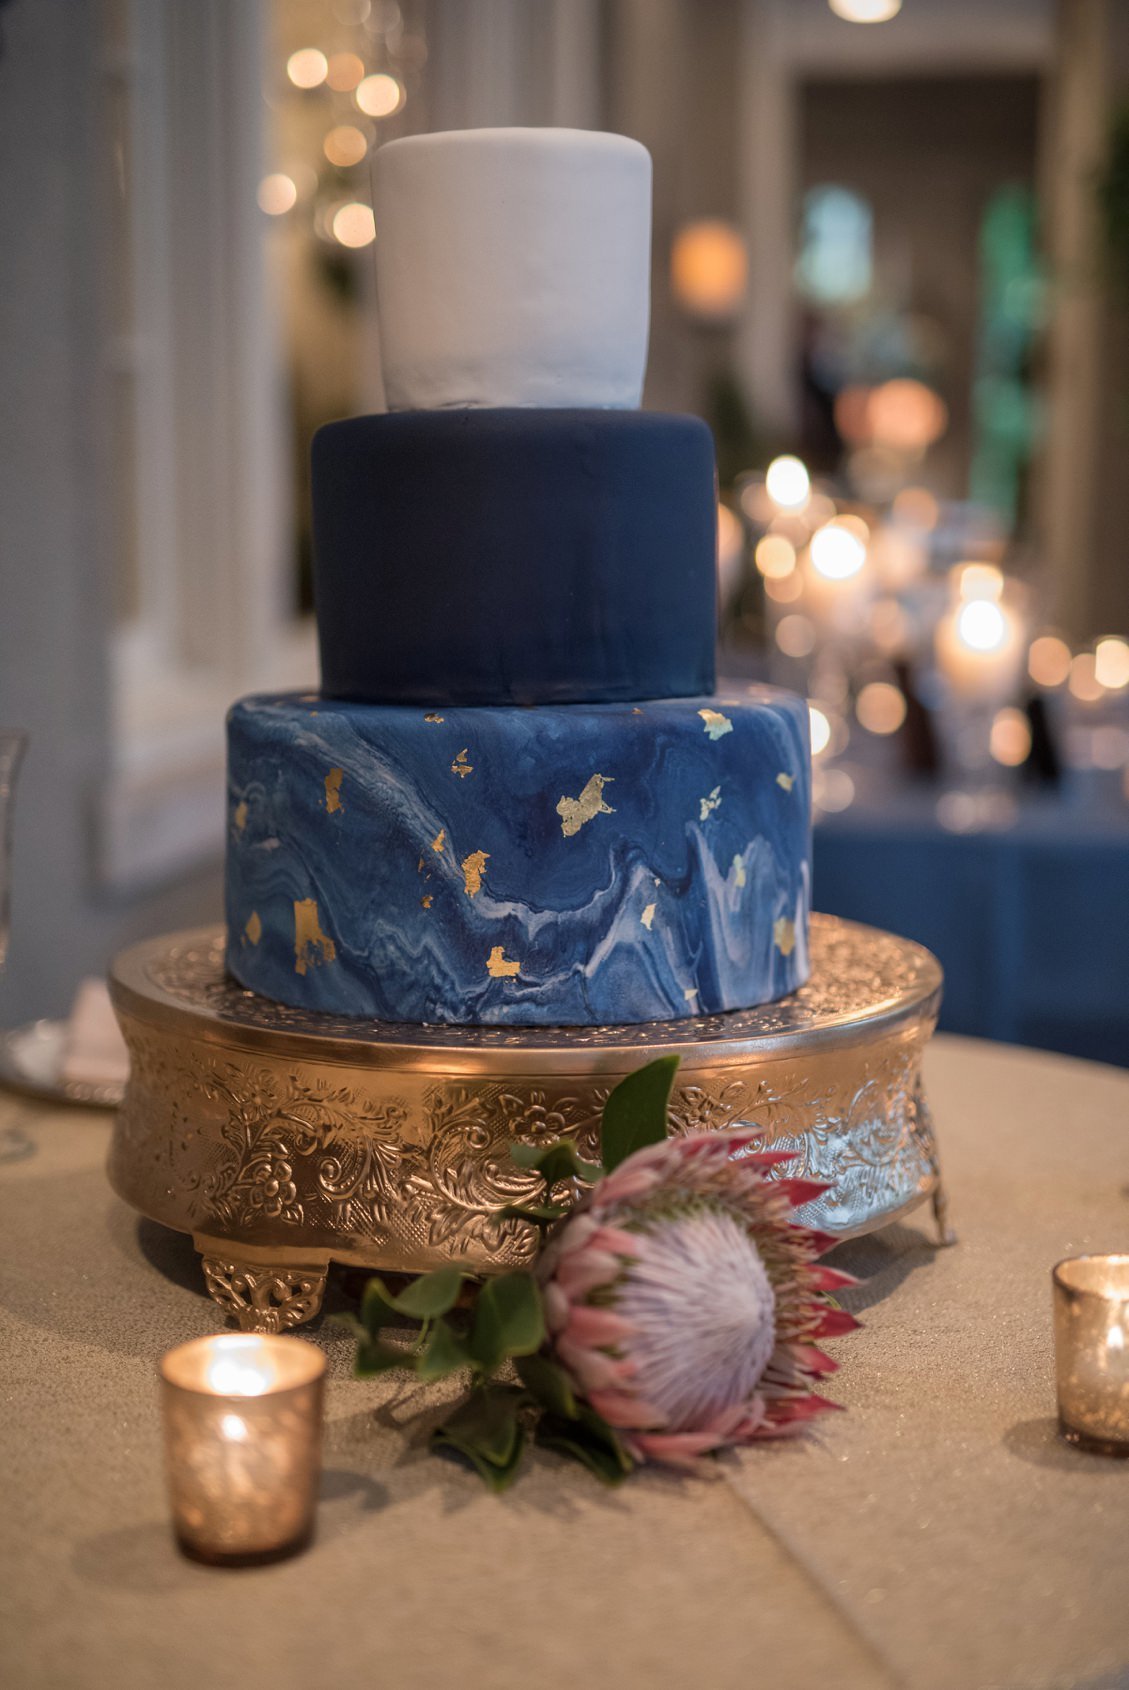 Blue, navy and white wedding cake with marble details and gold foil